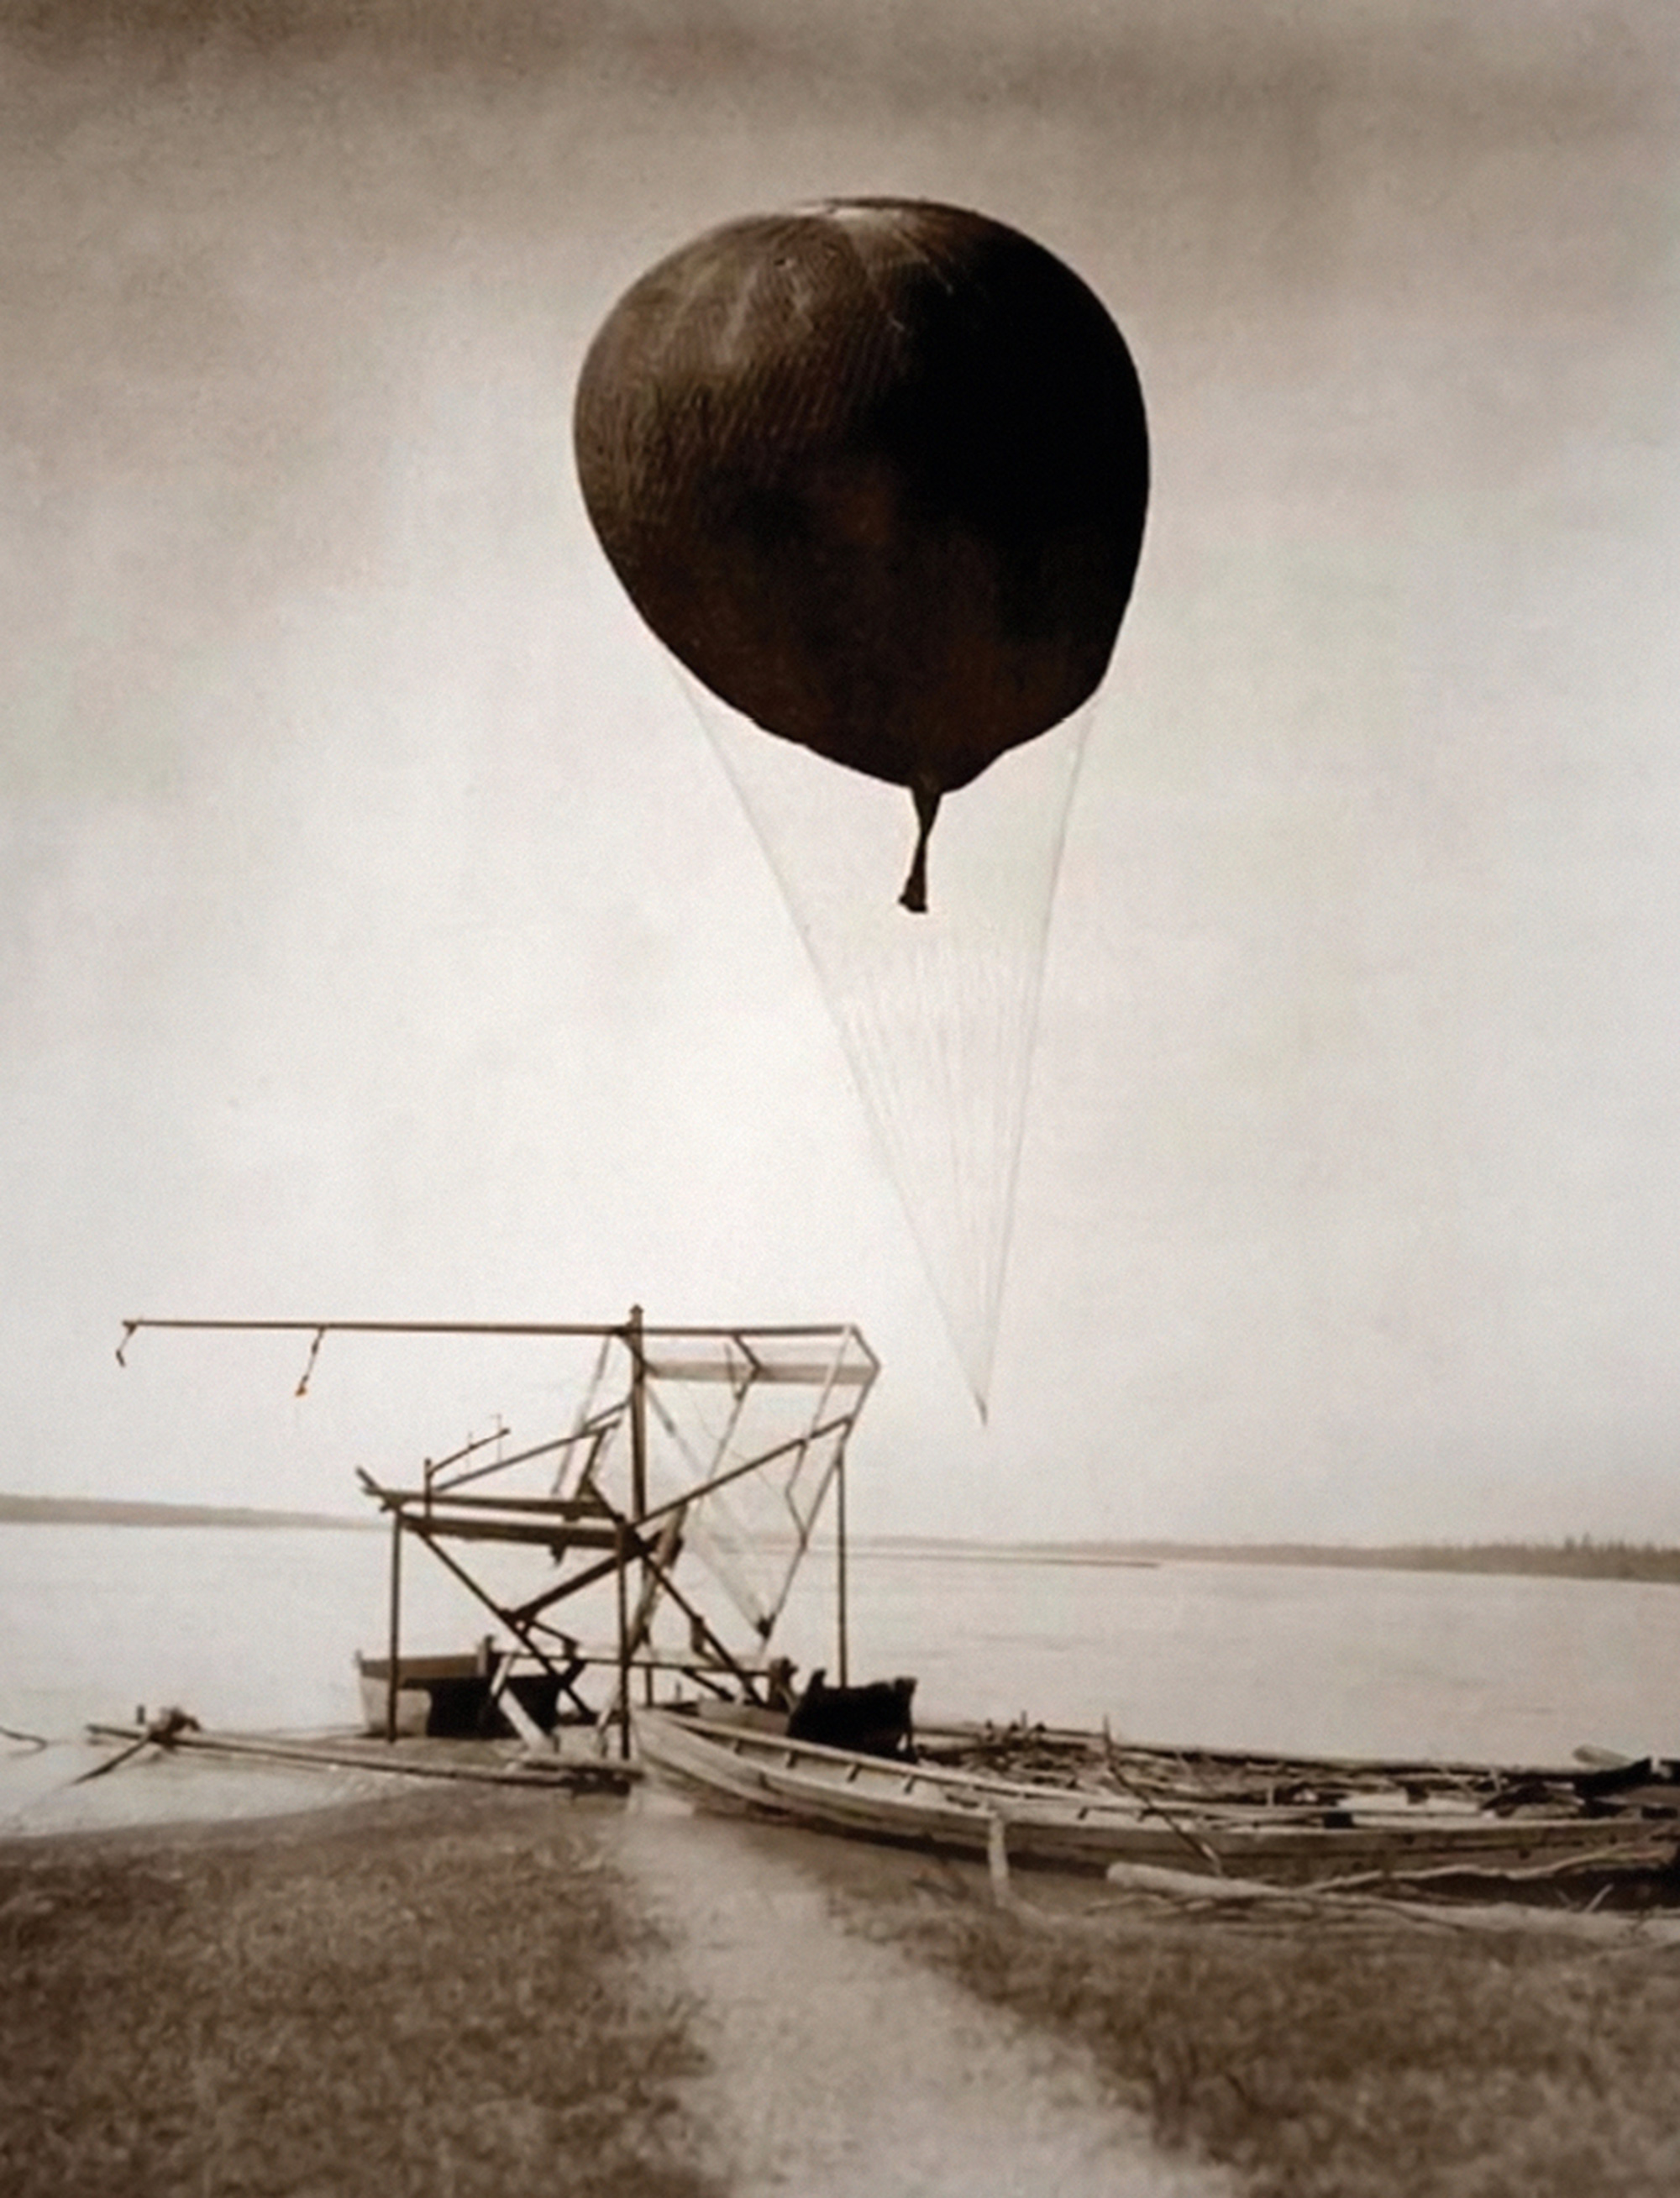 Oliver Wasow’s twenty ten artwork “Trappes, France.” It depicts some kind of balloon rising from a primitive dock. 